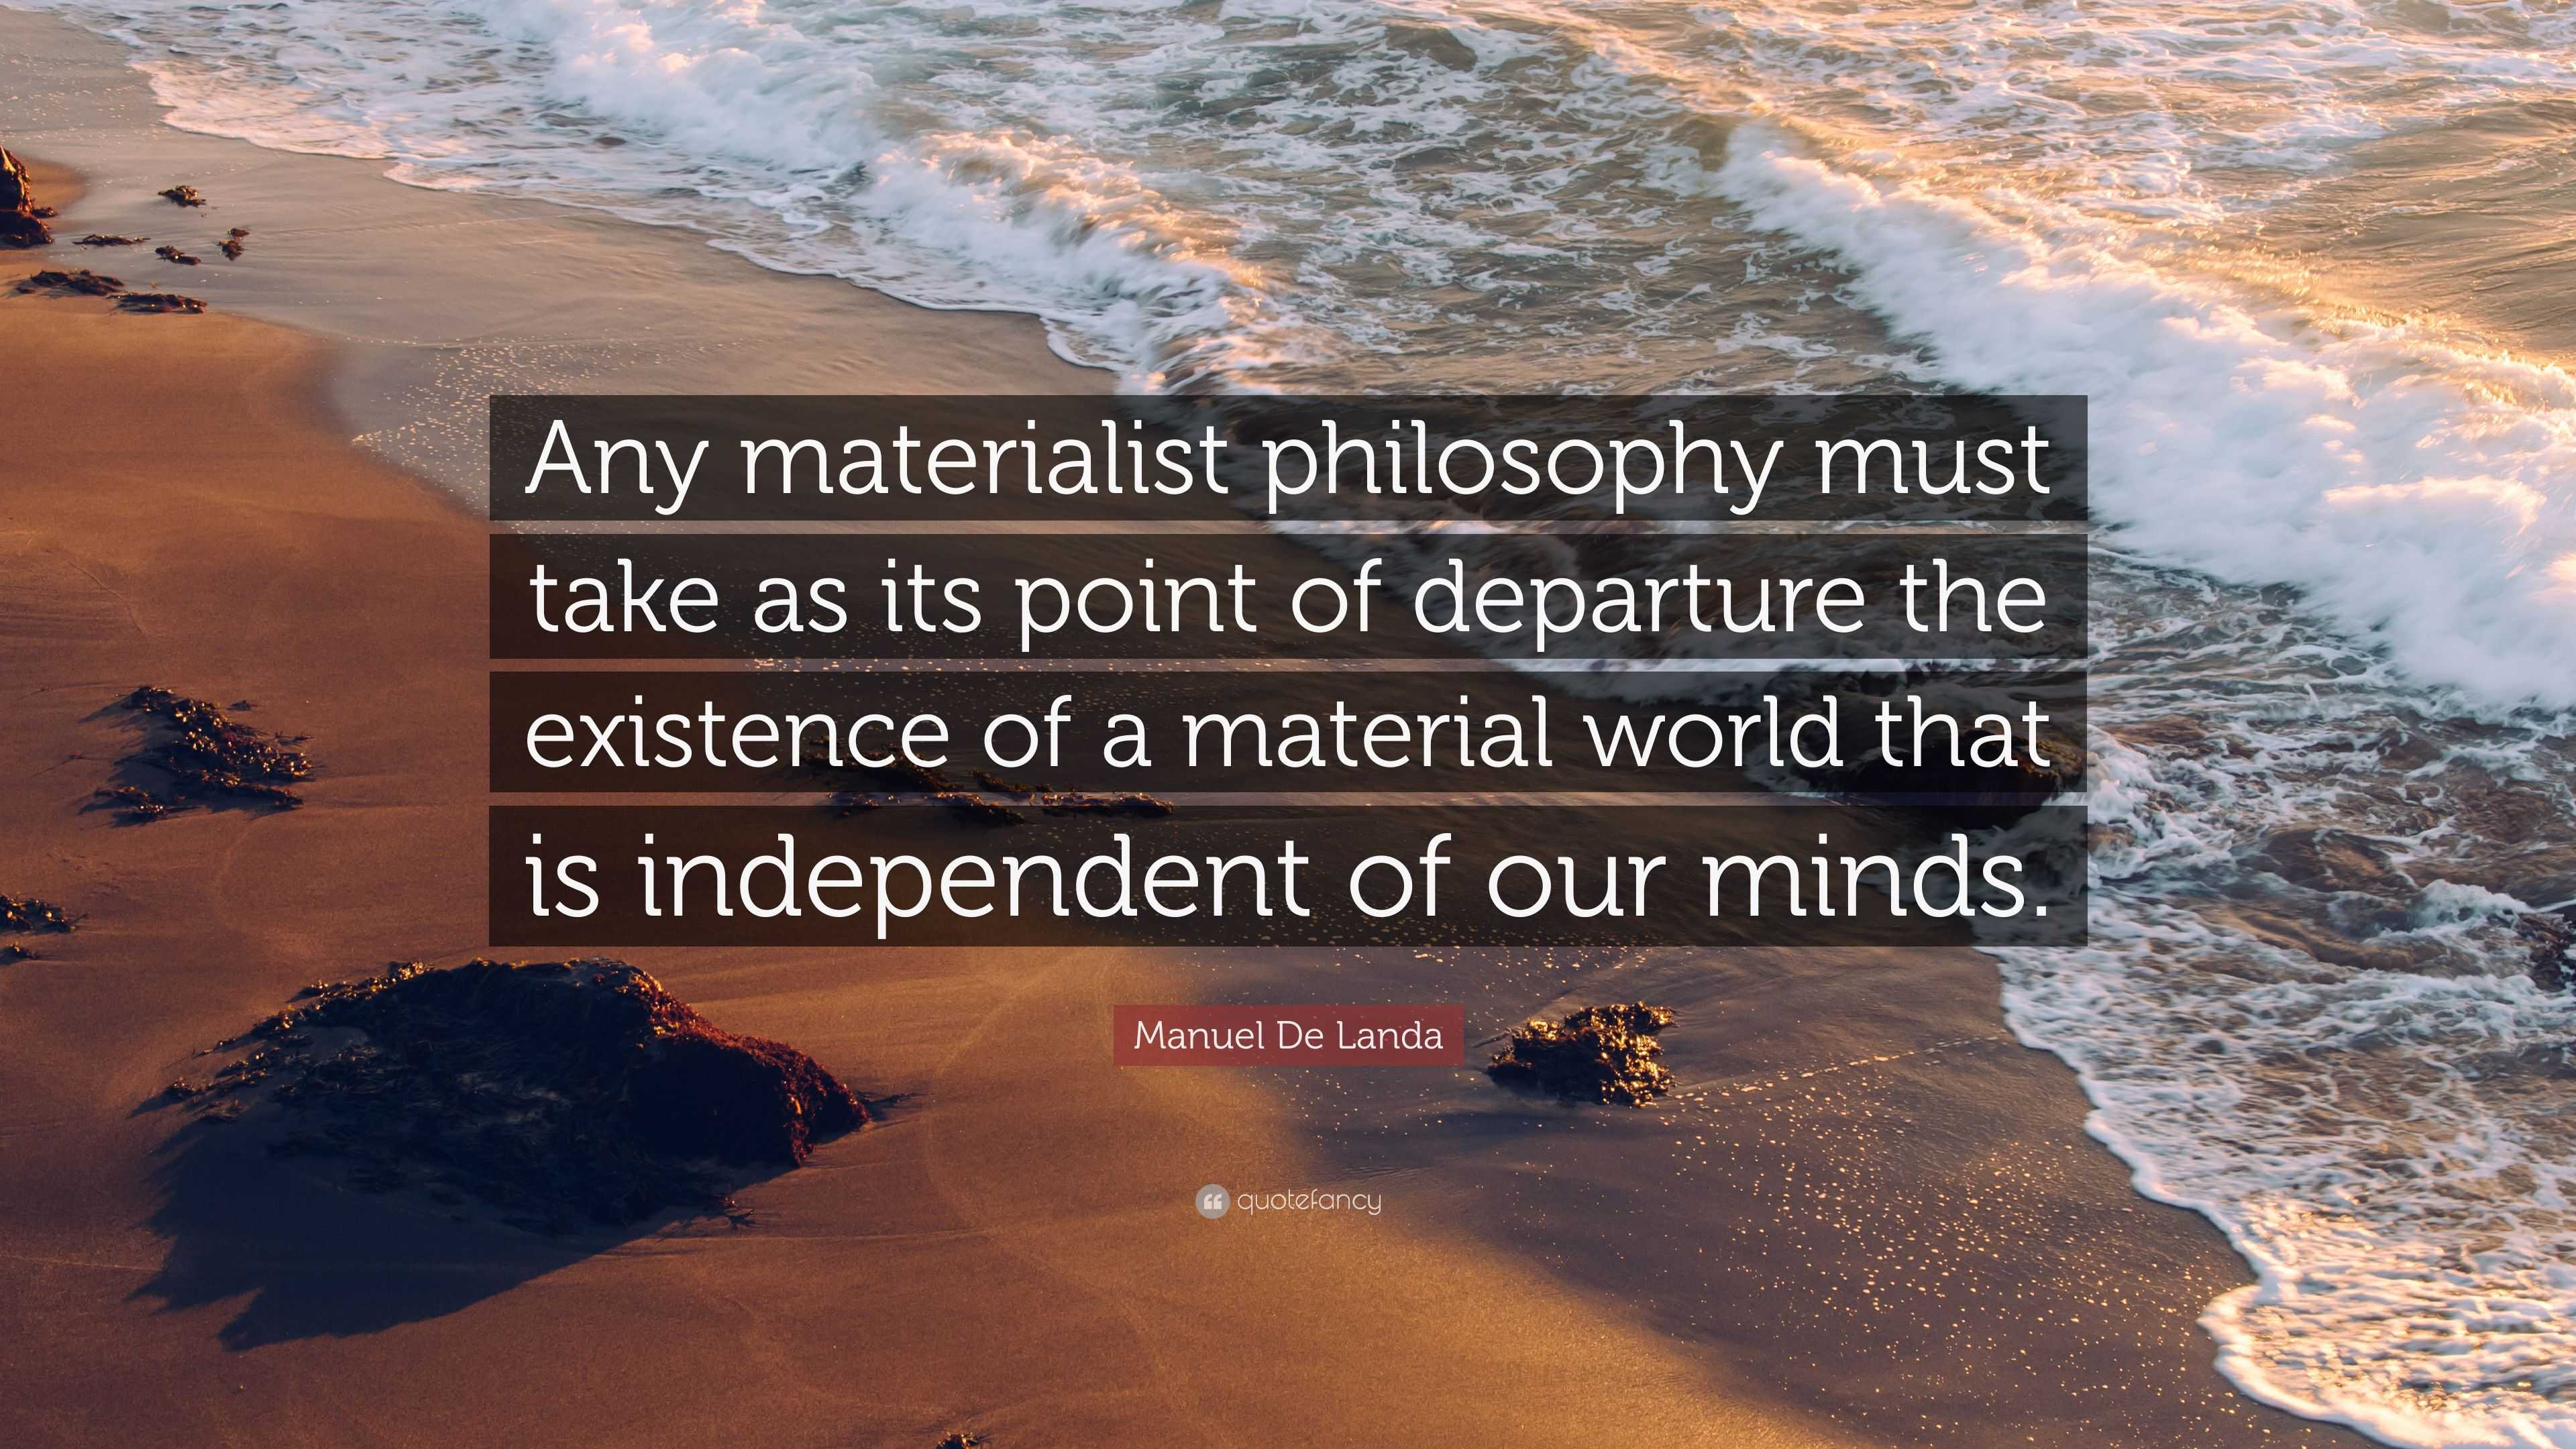 Manuel De Landa Quote: “Any materialist philosophy must take as its ...